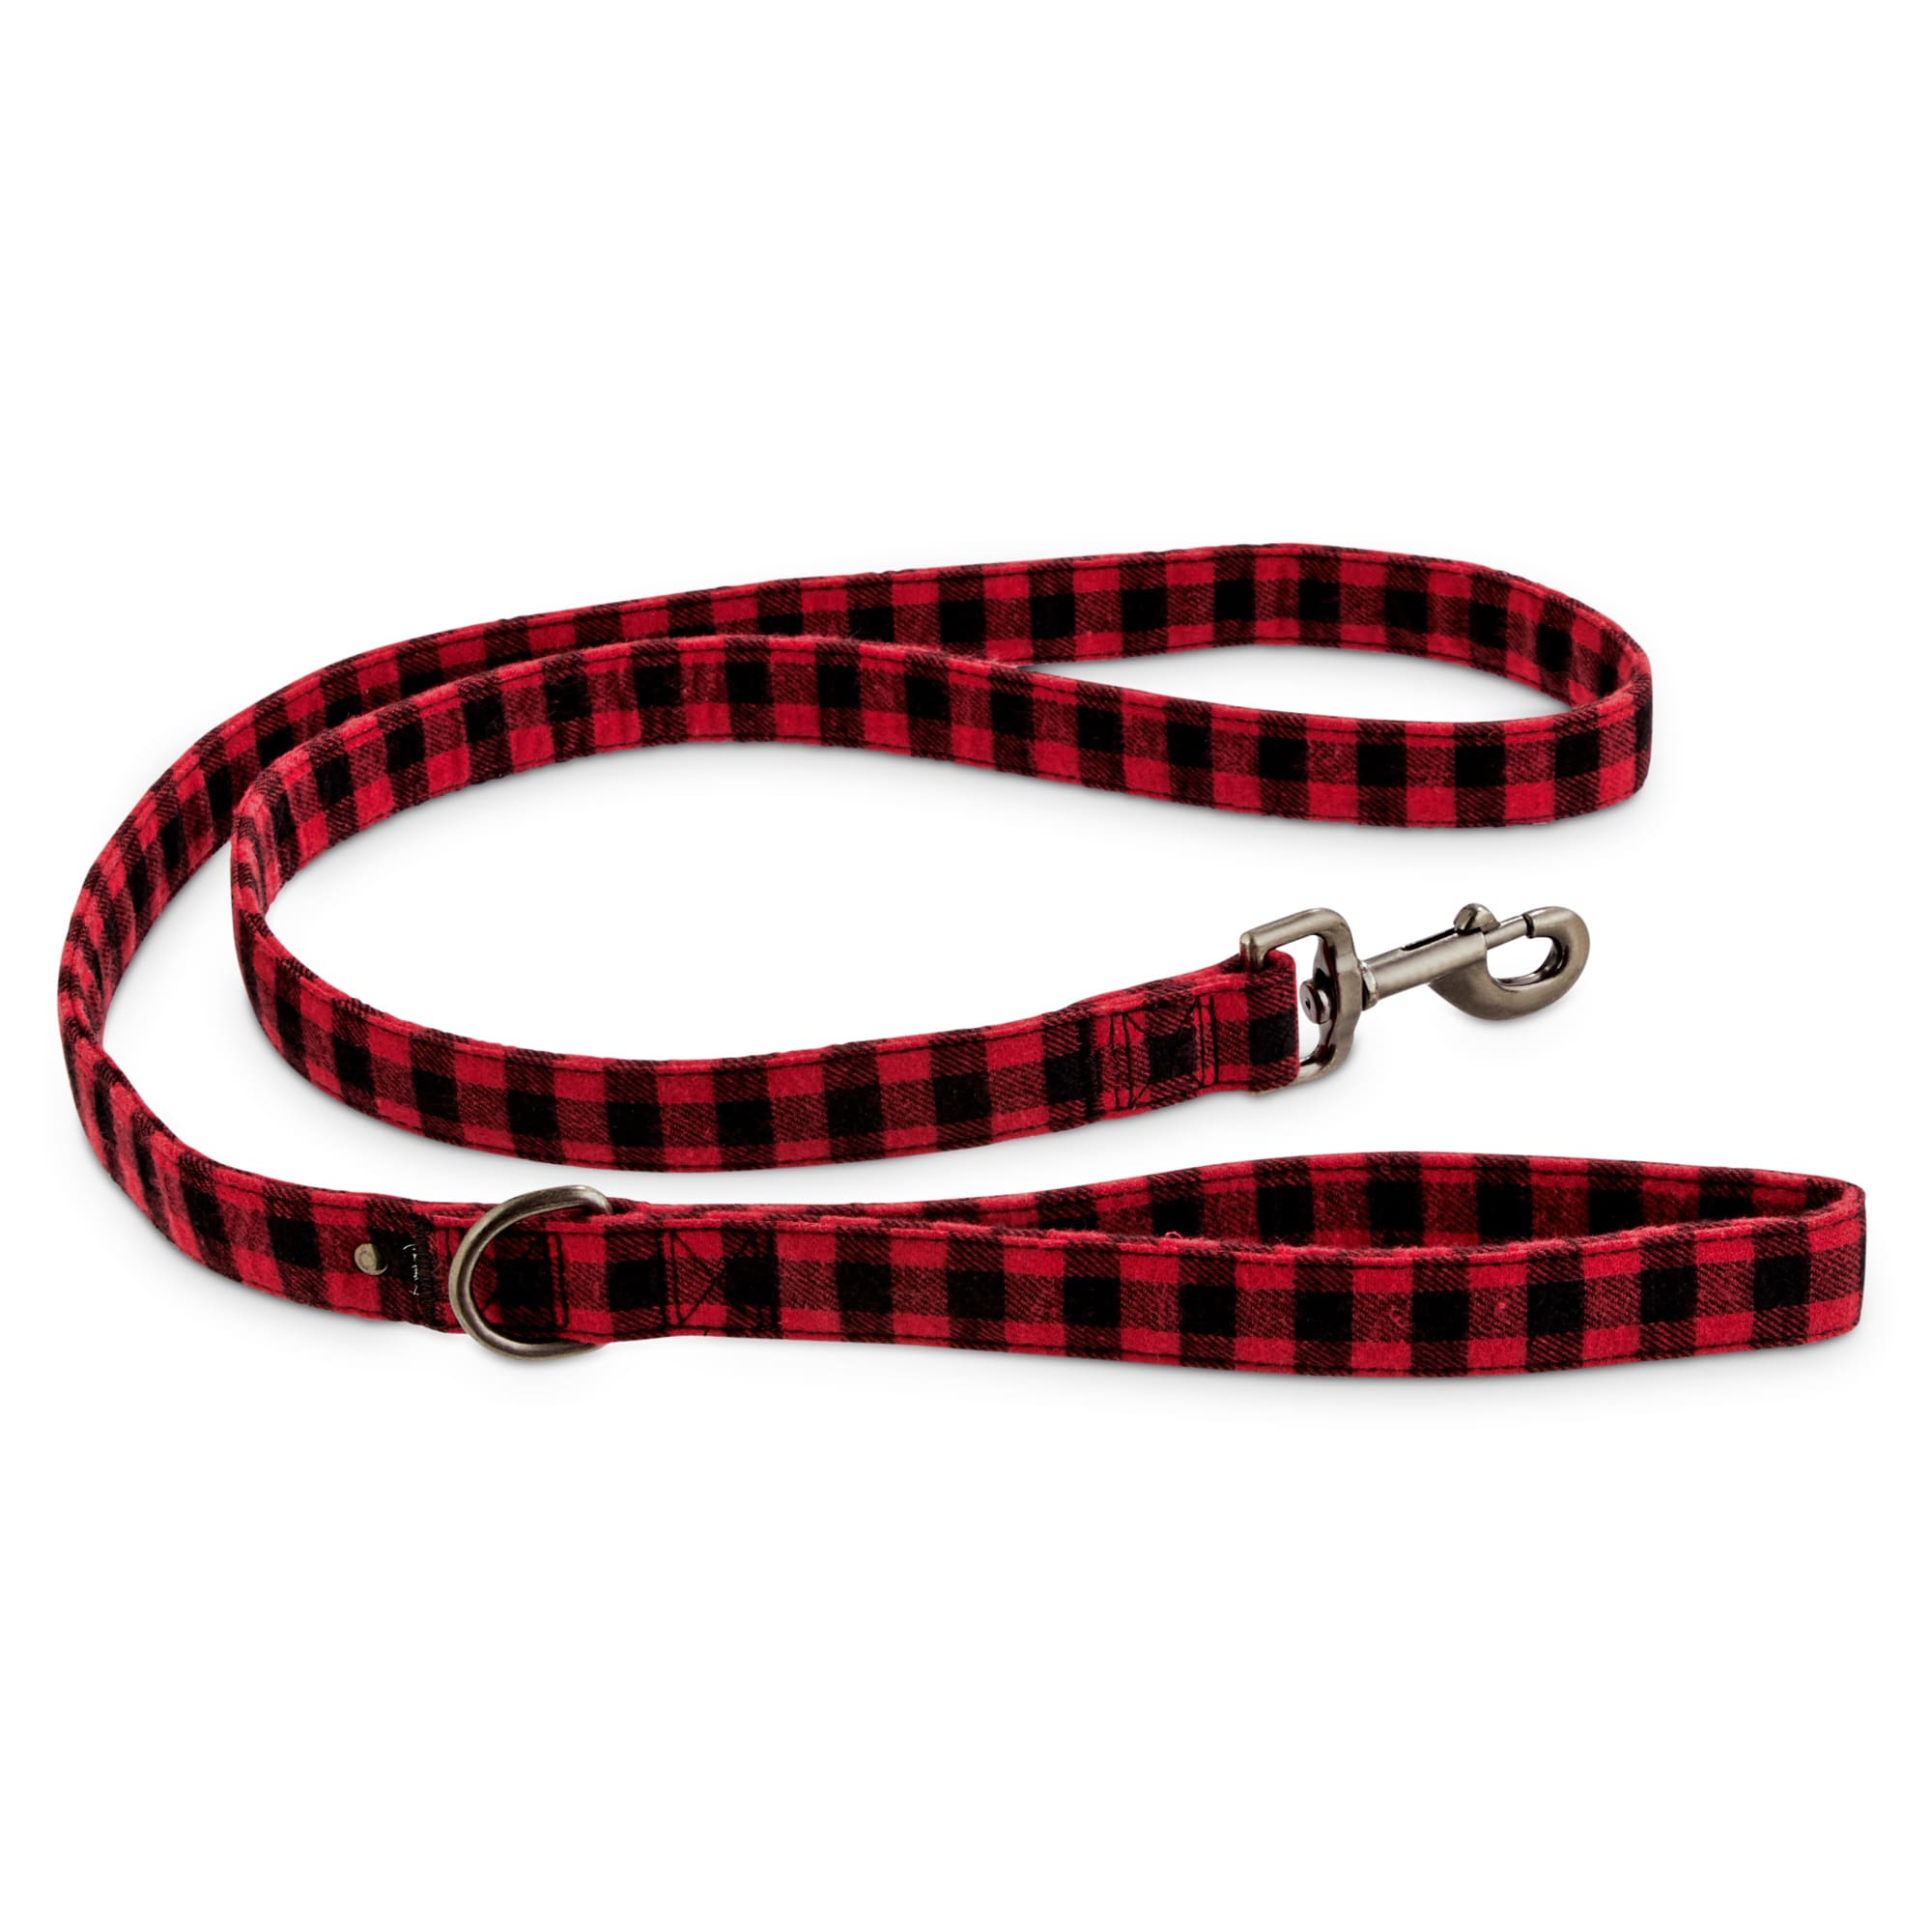 Dog Leash 100% Cotton Hand Crafted 6ft Brass Metal Hook Ring Pet Leash Puppy Dog gifts Buffalo Plaid Red 551